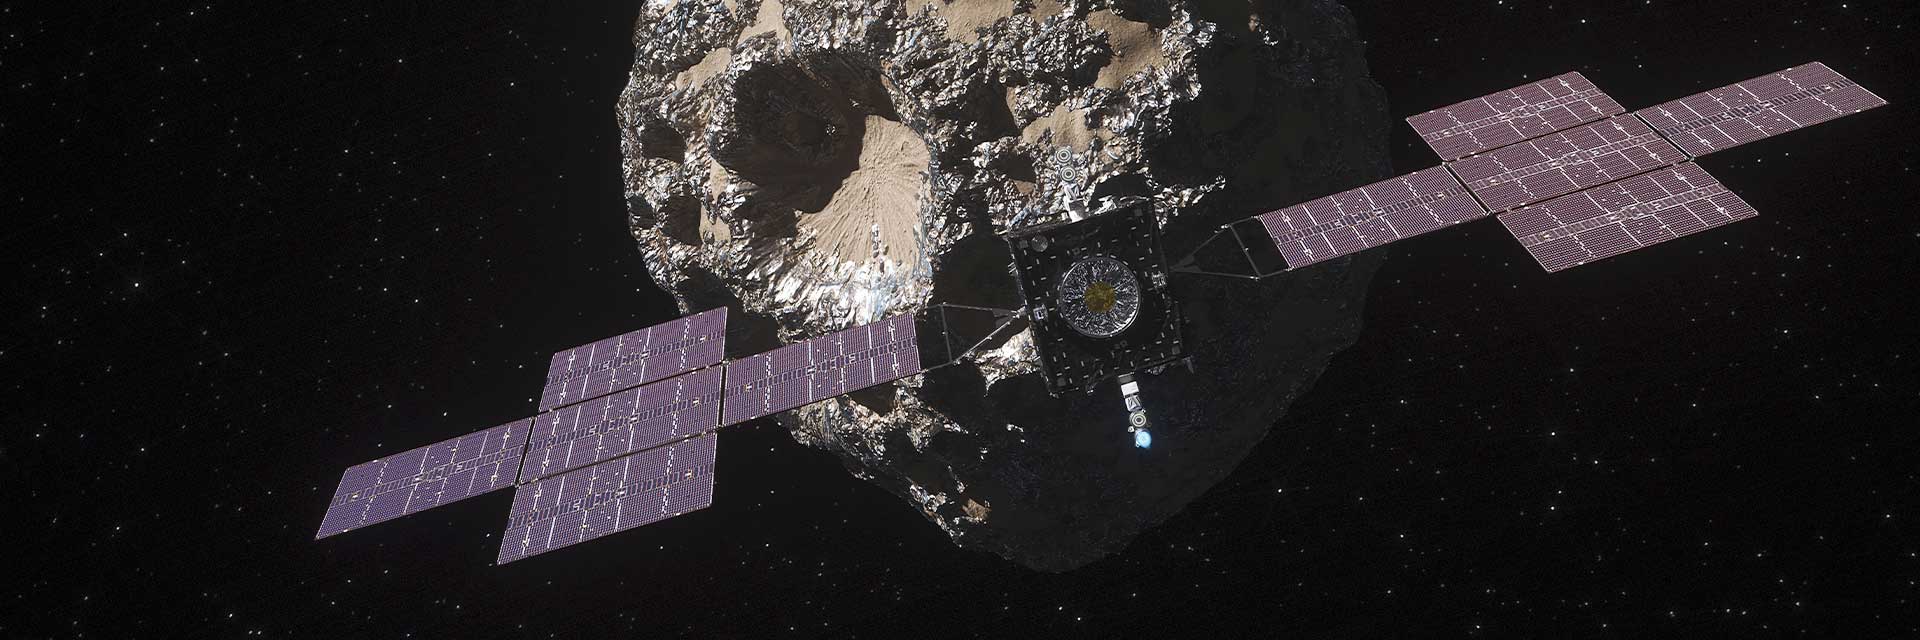 An illustration of a square spacecraft with solar winds on each side in front of an asteroid with a big crater and shiny raised areas that could be metallic.